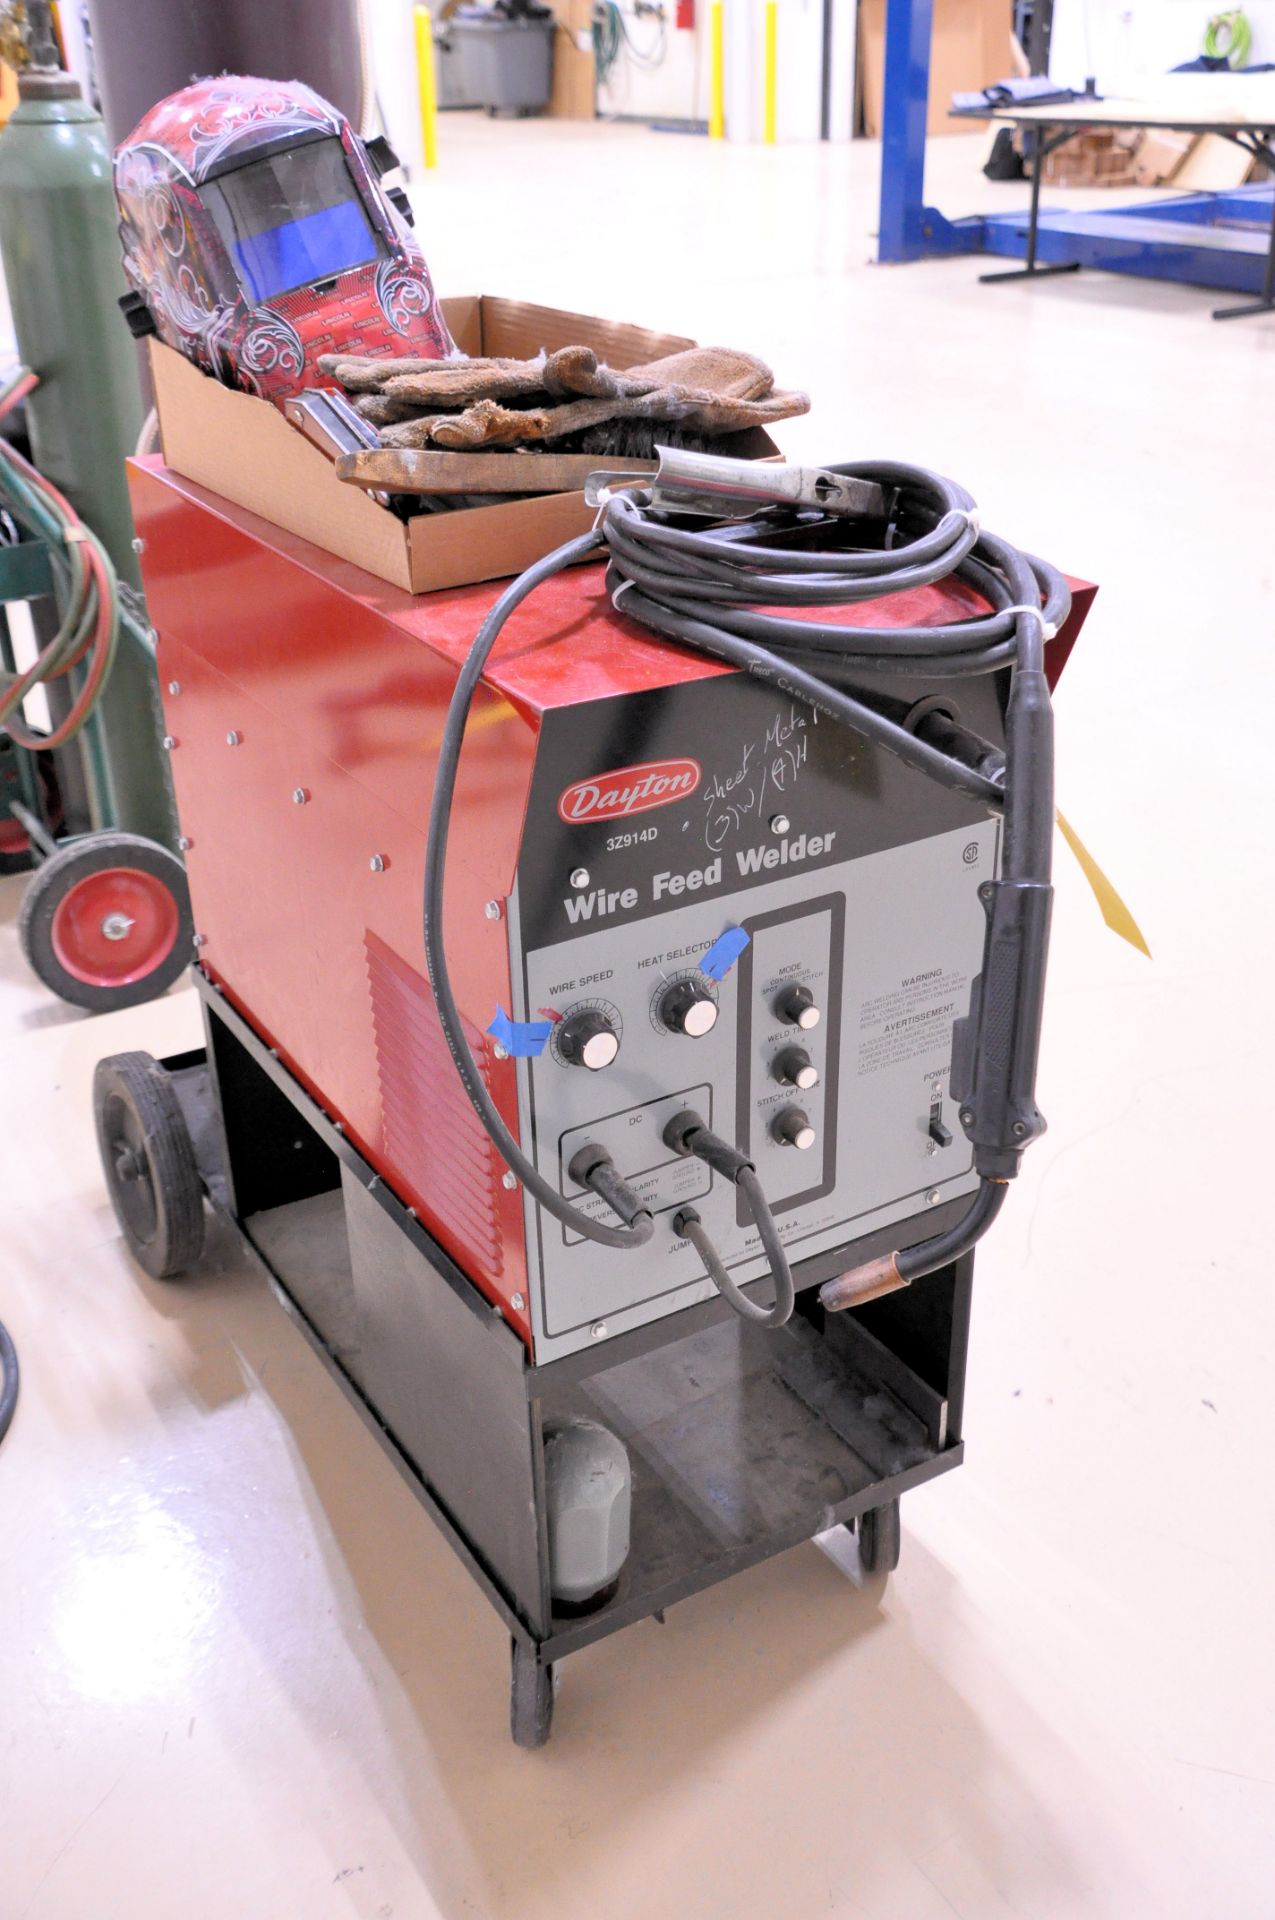 Dayton 3Z914D, Model 117-037-902, DC Wire Feed Mig Welder, S/n F286693 (1994), with Leads, - Image 2 of 6